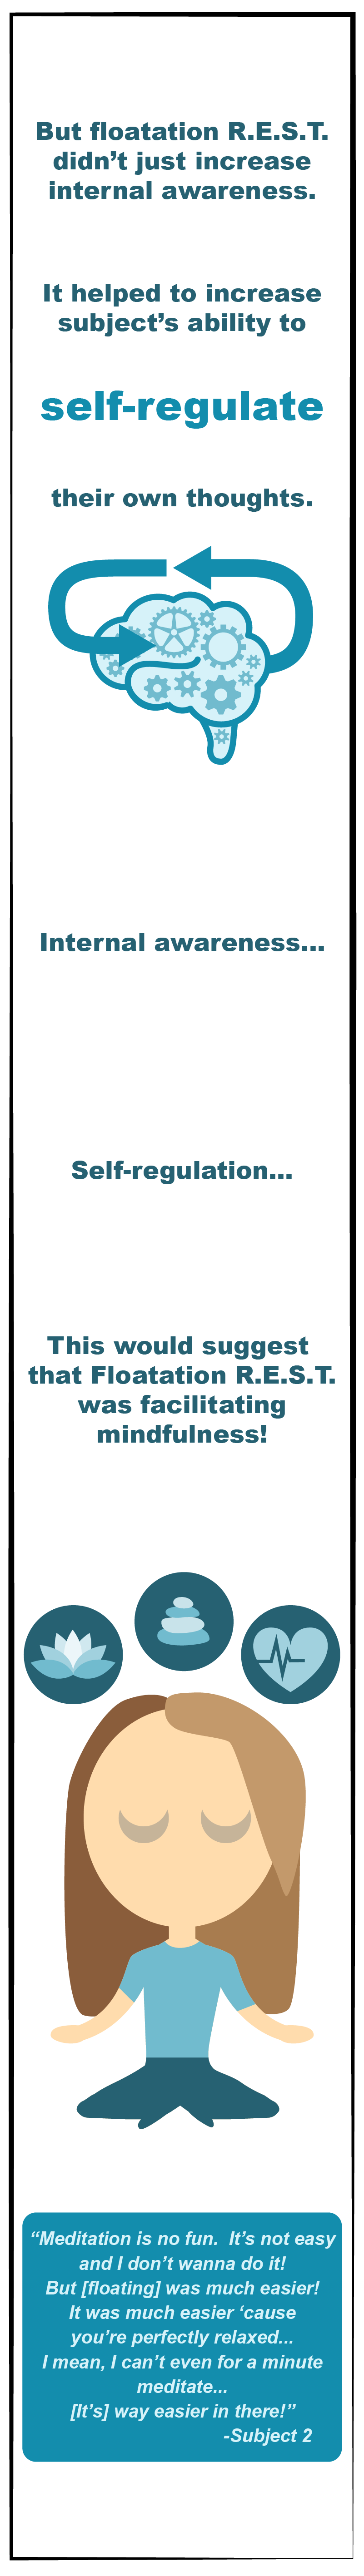 Floating helped subjects self-regulate their own thoughts.